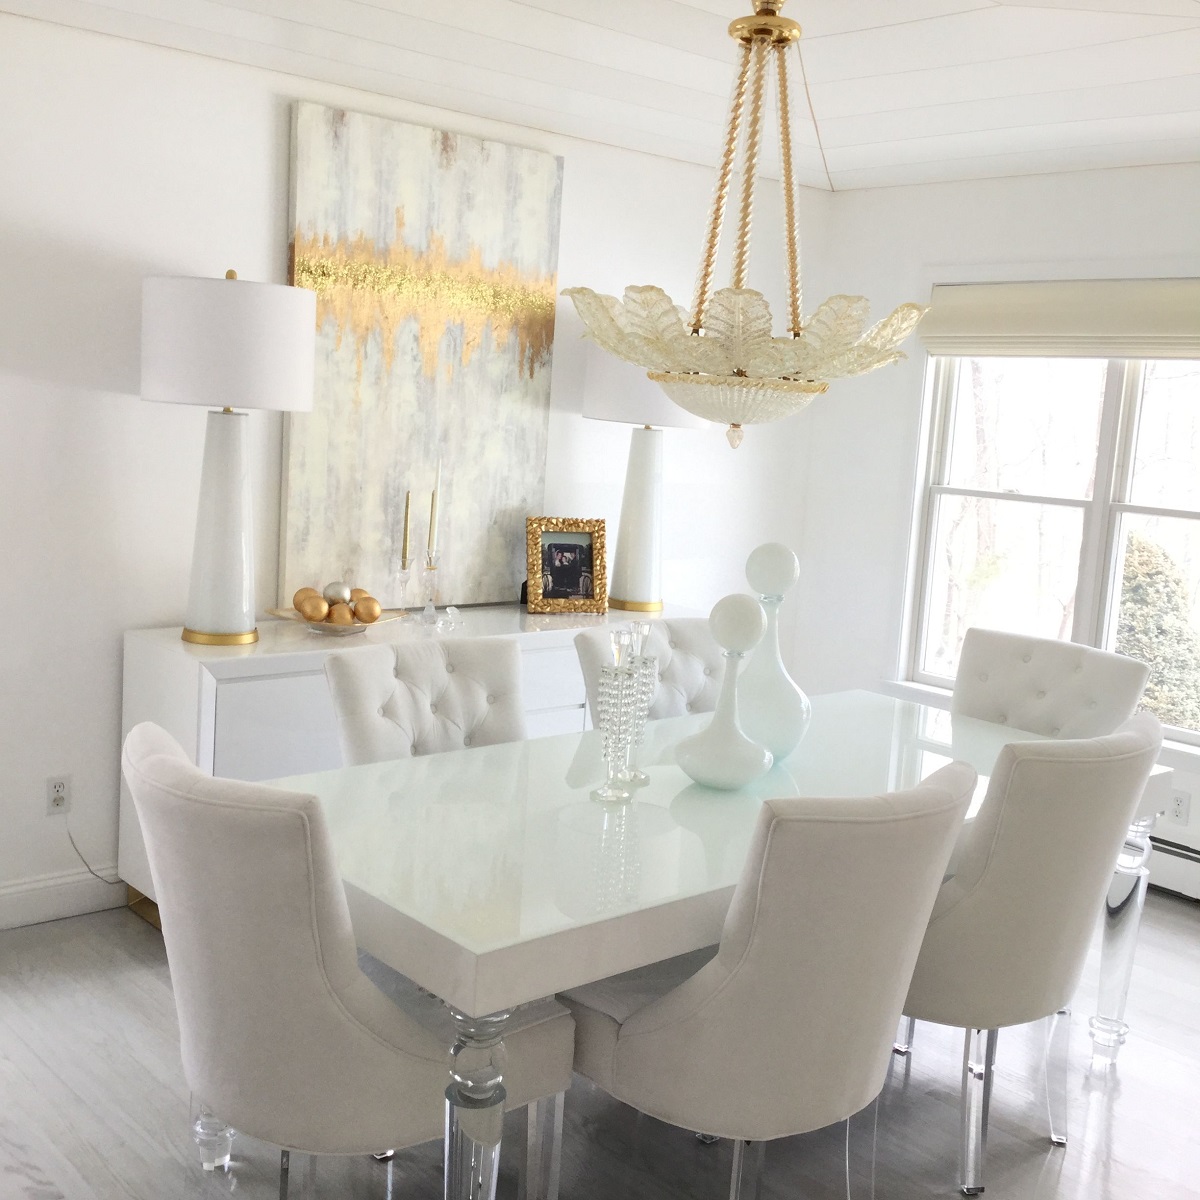 White Dining Room Ideas: 10 Designs For A Calming And Inviting Space